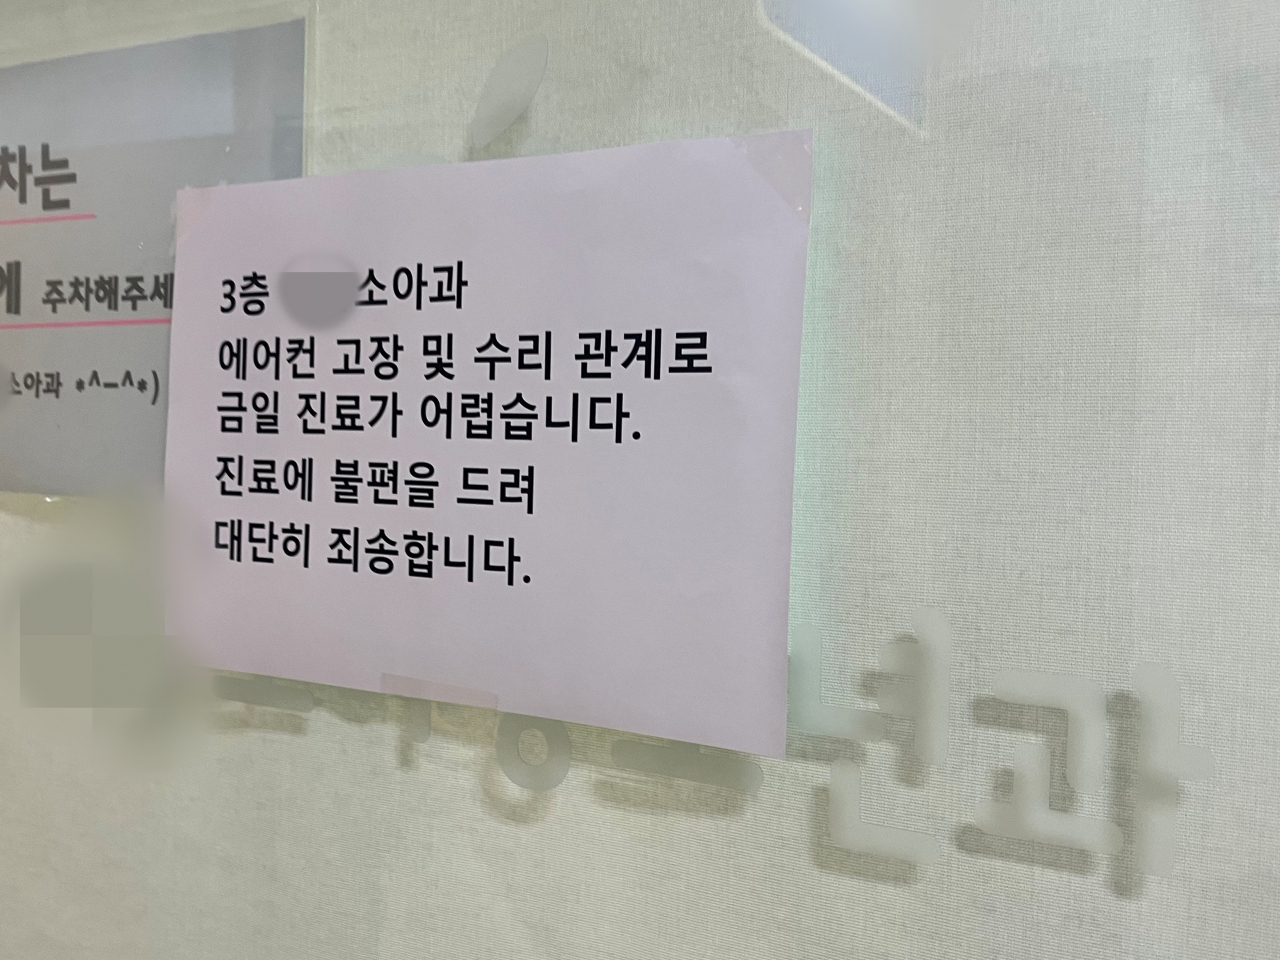 A notice at a pediatric clinic in Nowon, Seoul, on Tuesday, says that the clinic will be closed for the whole day due to the air conditioning failure. (Lee Jaeeun/The Korea Herald)